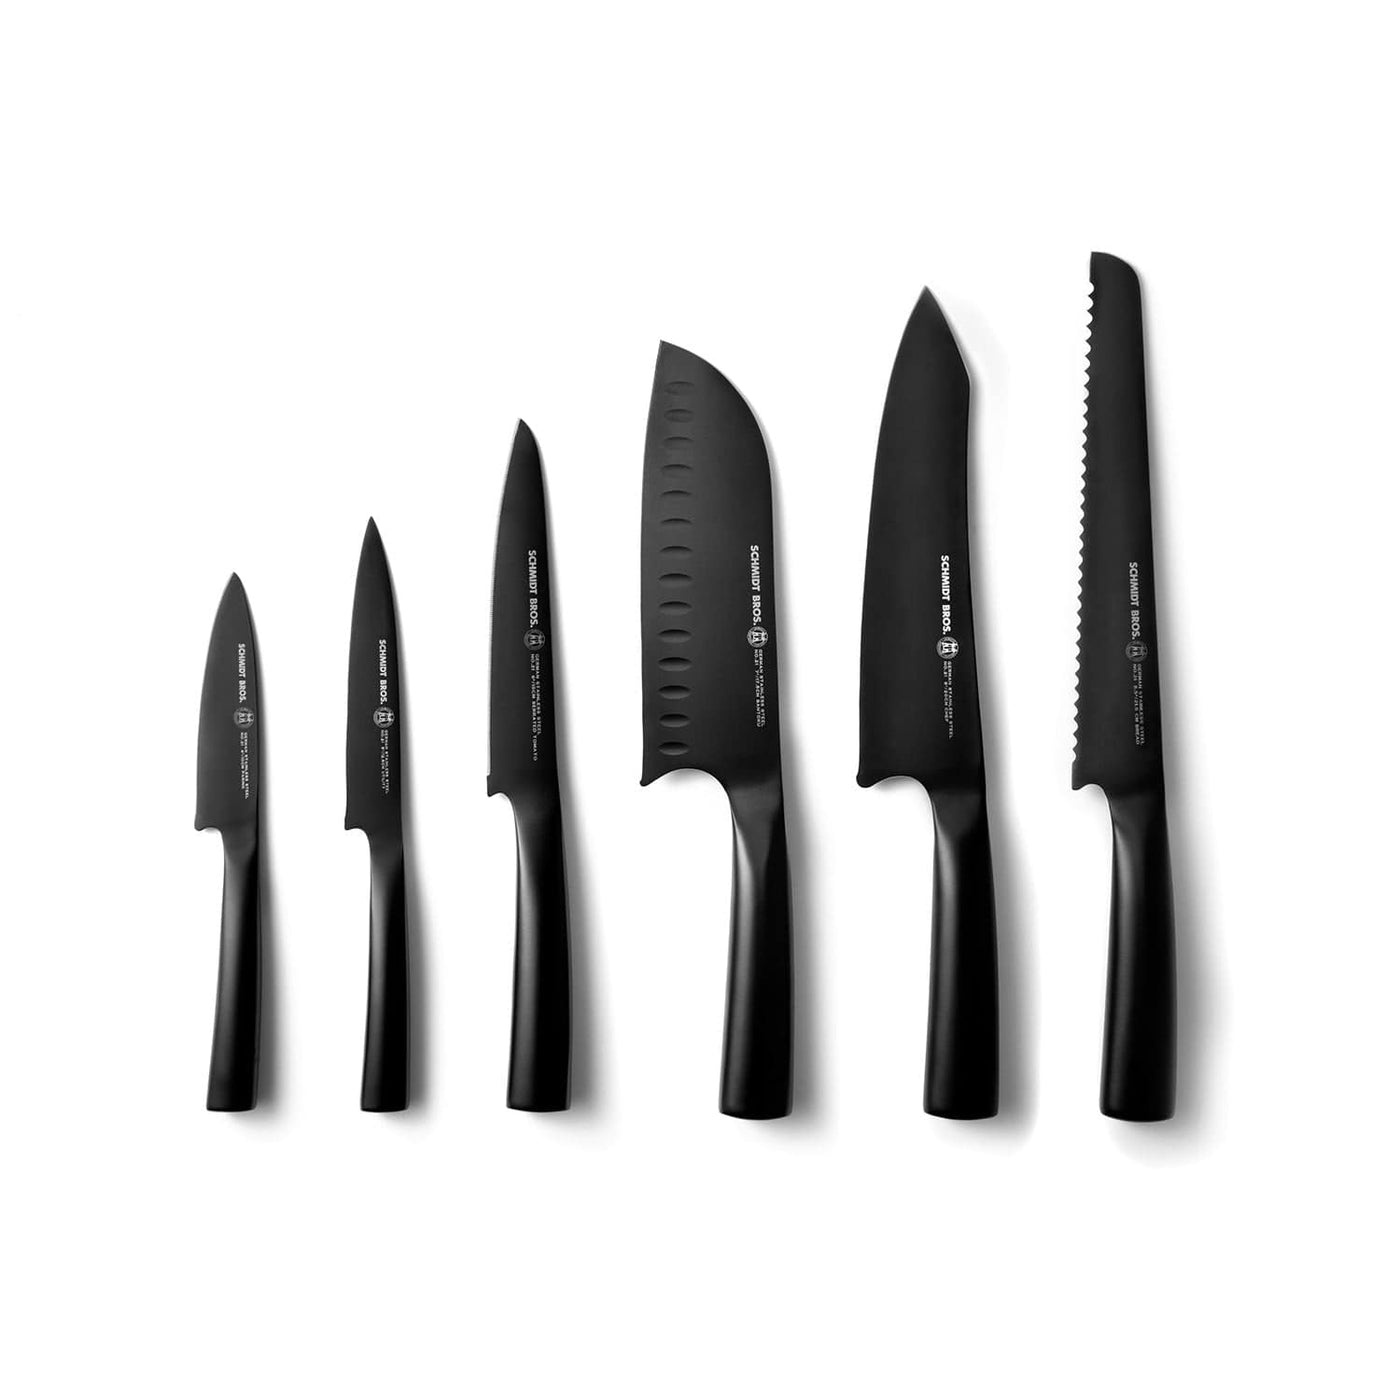 Cheer Collection Kitchen Knife Sharpening Tool with Cut-Resistant Glove Included - Black